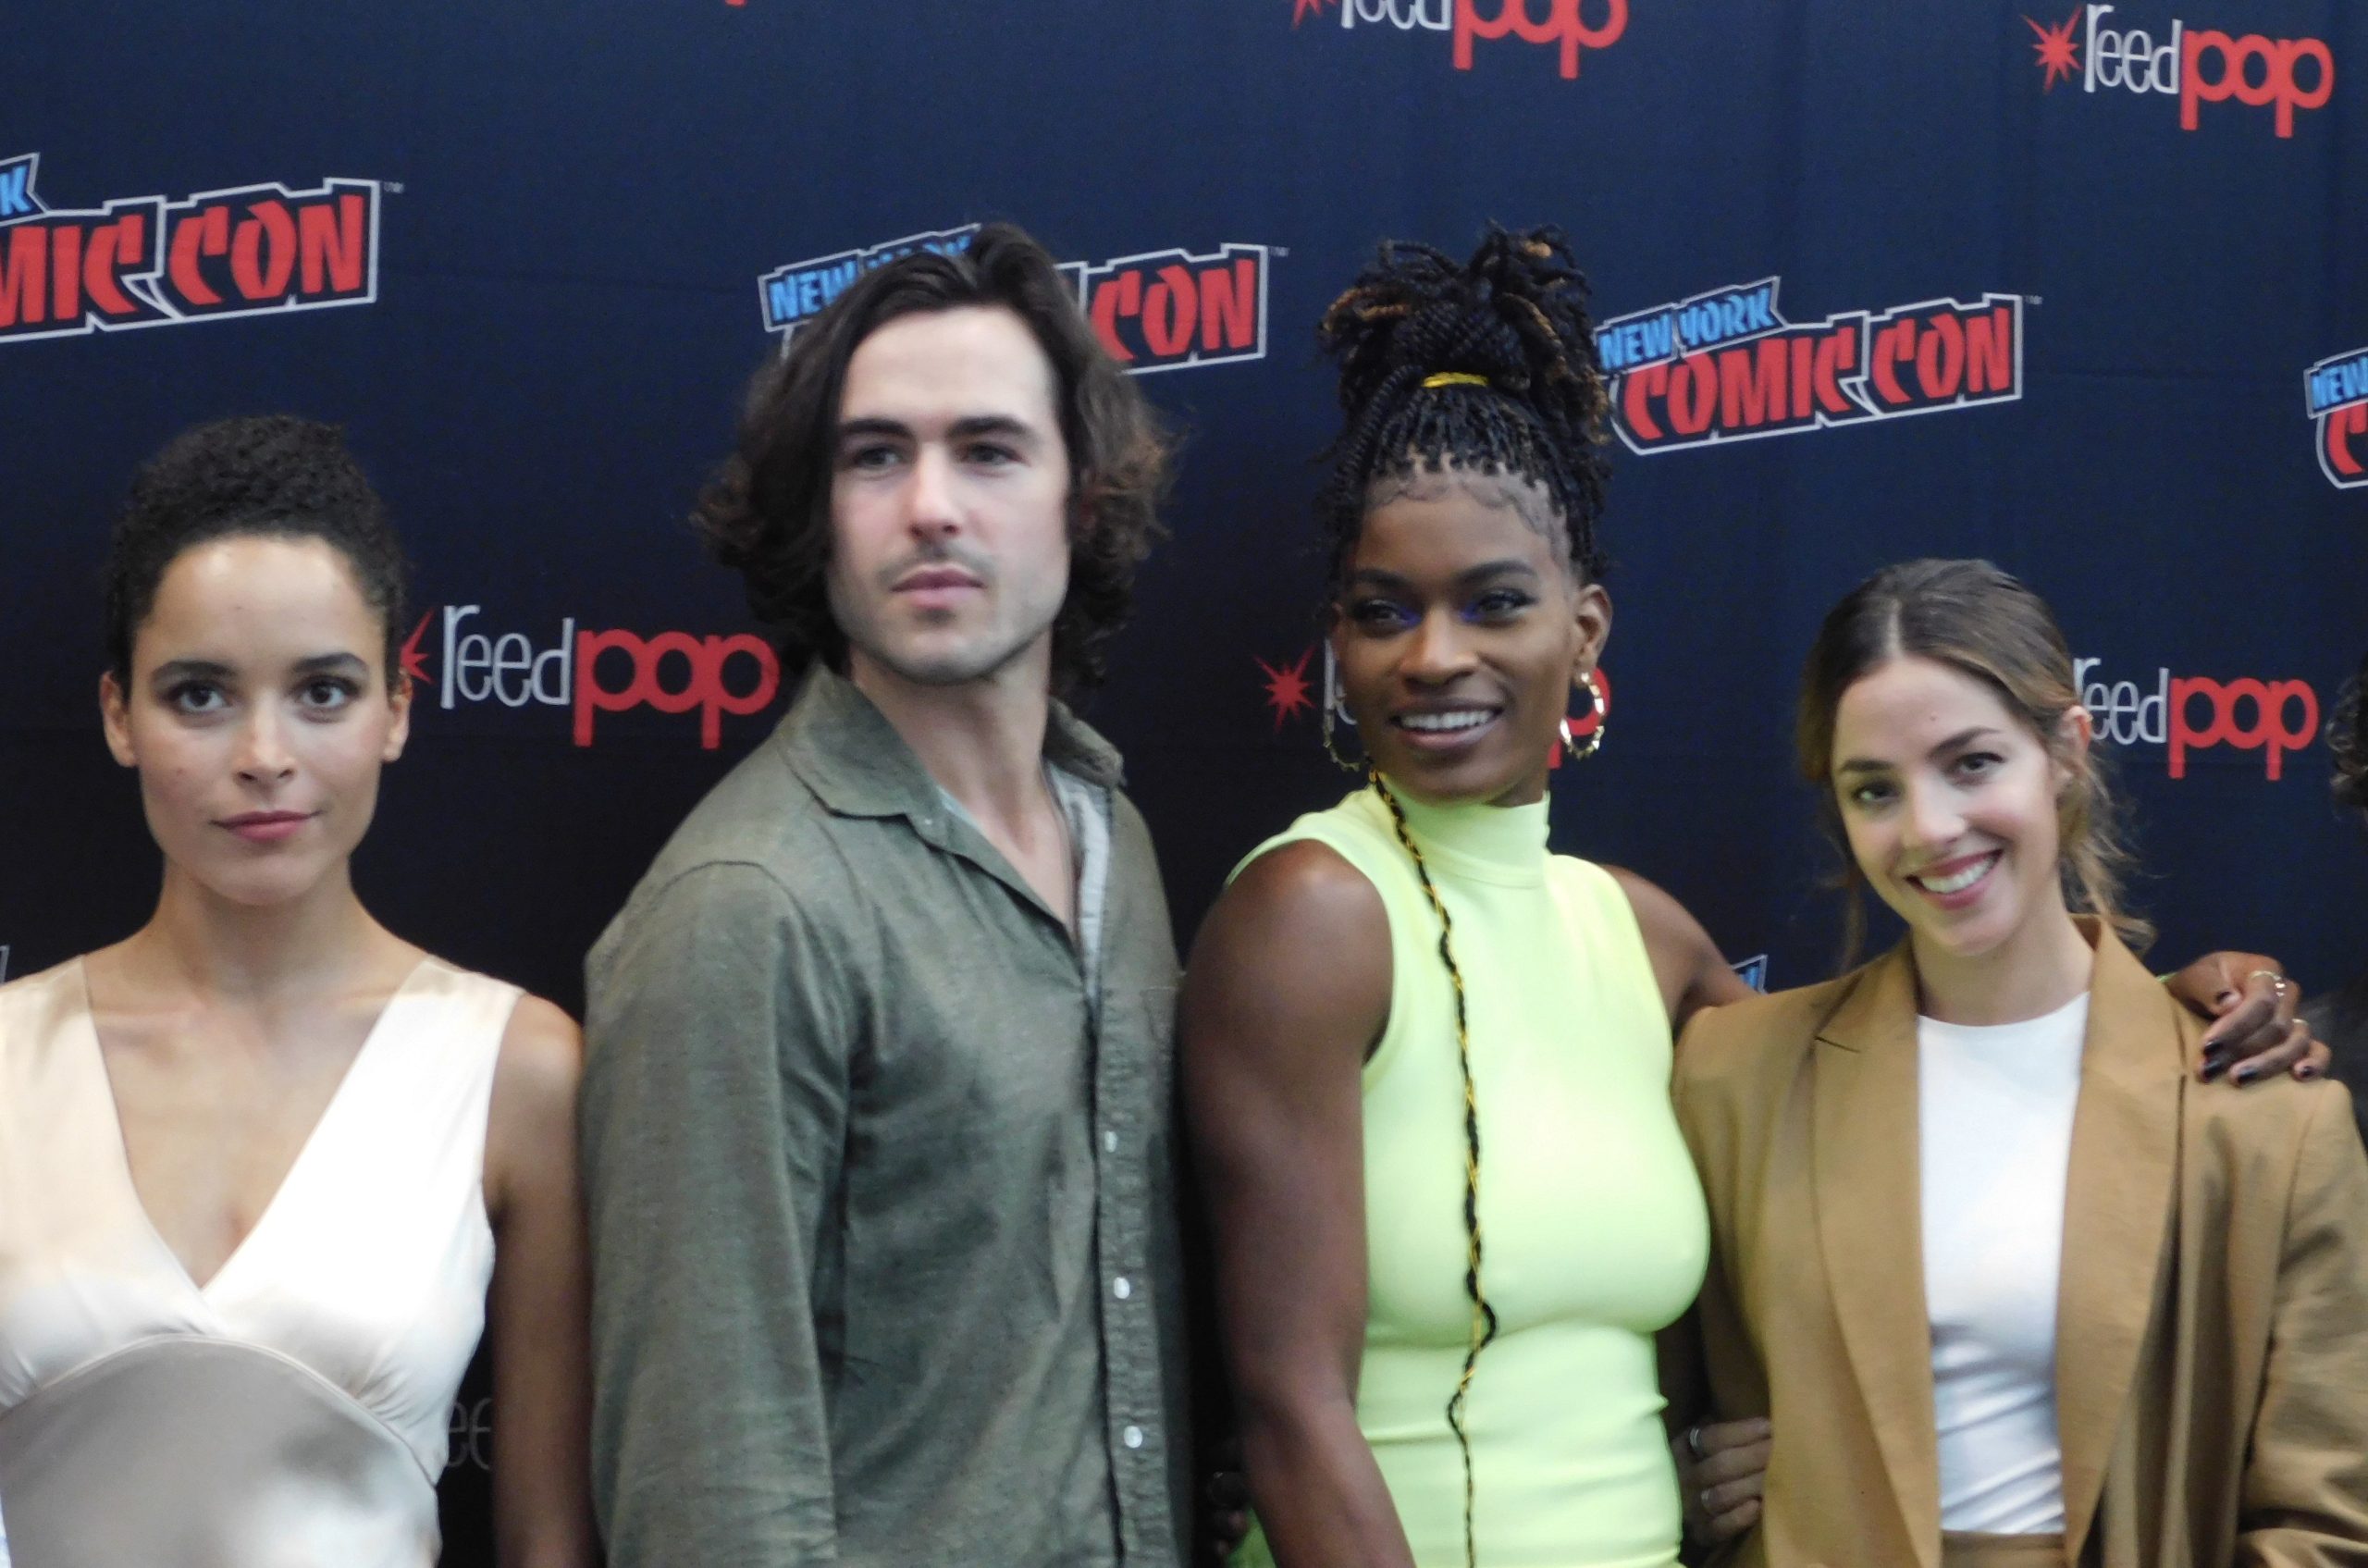 mature to punish suffer New York Comi-Con : Y : The Last Man / Interview with Actor Ben Schnetzer,  Actress Olivia Thirlby, Actress Ashley Romans, Actress Amber Tamblyn and  More - Cinema Daily US